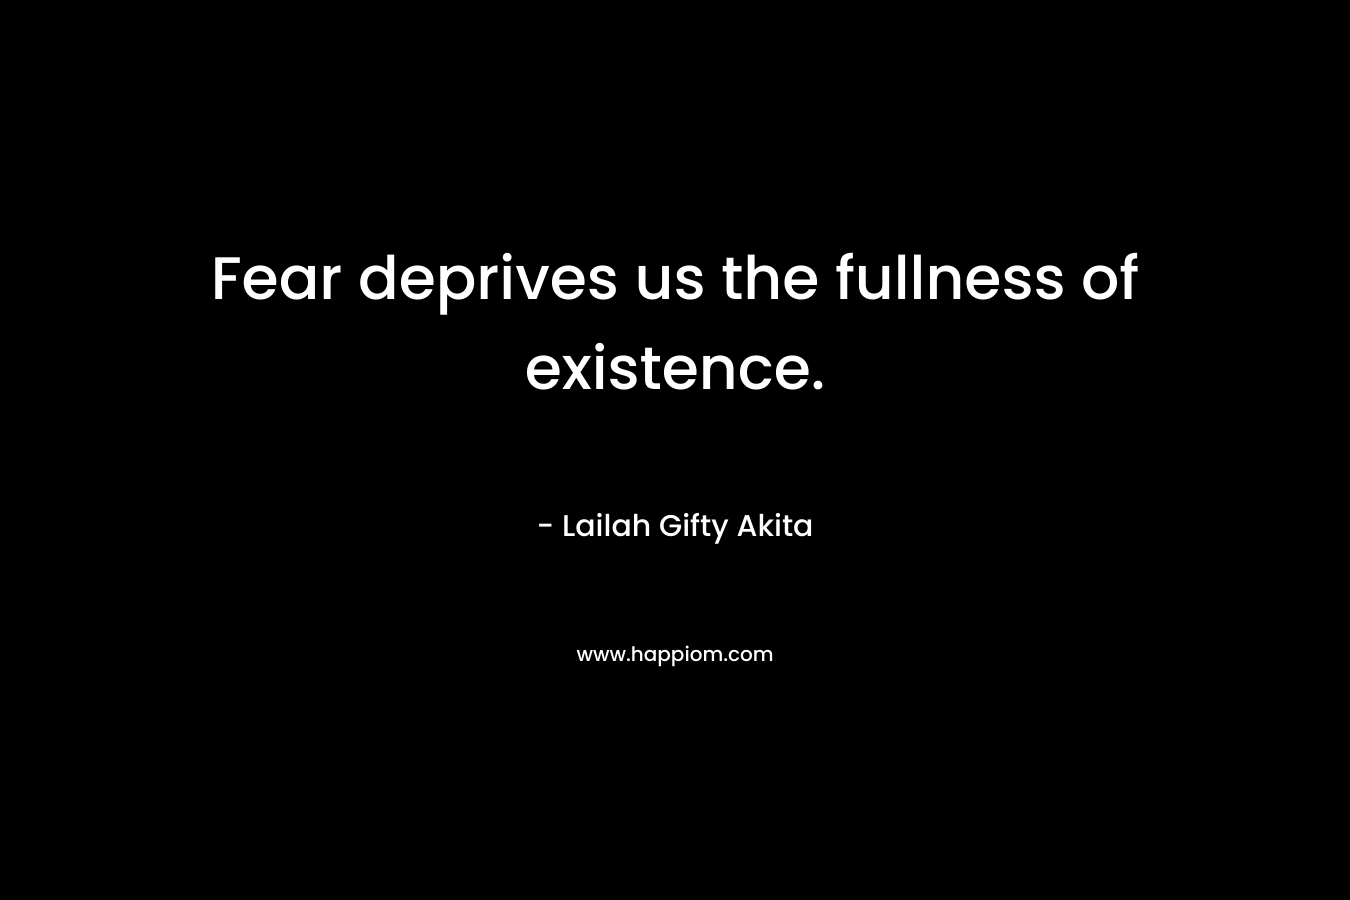 Fear deprives us the fullness of existence.